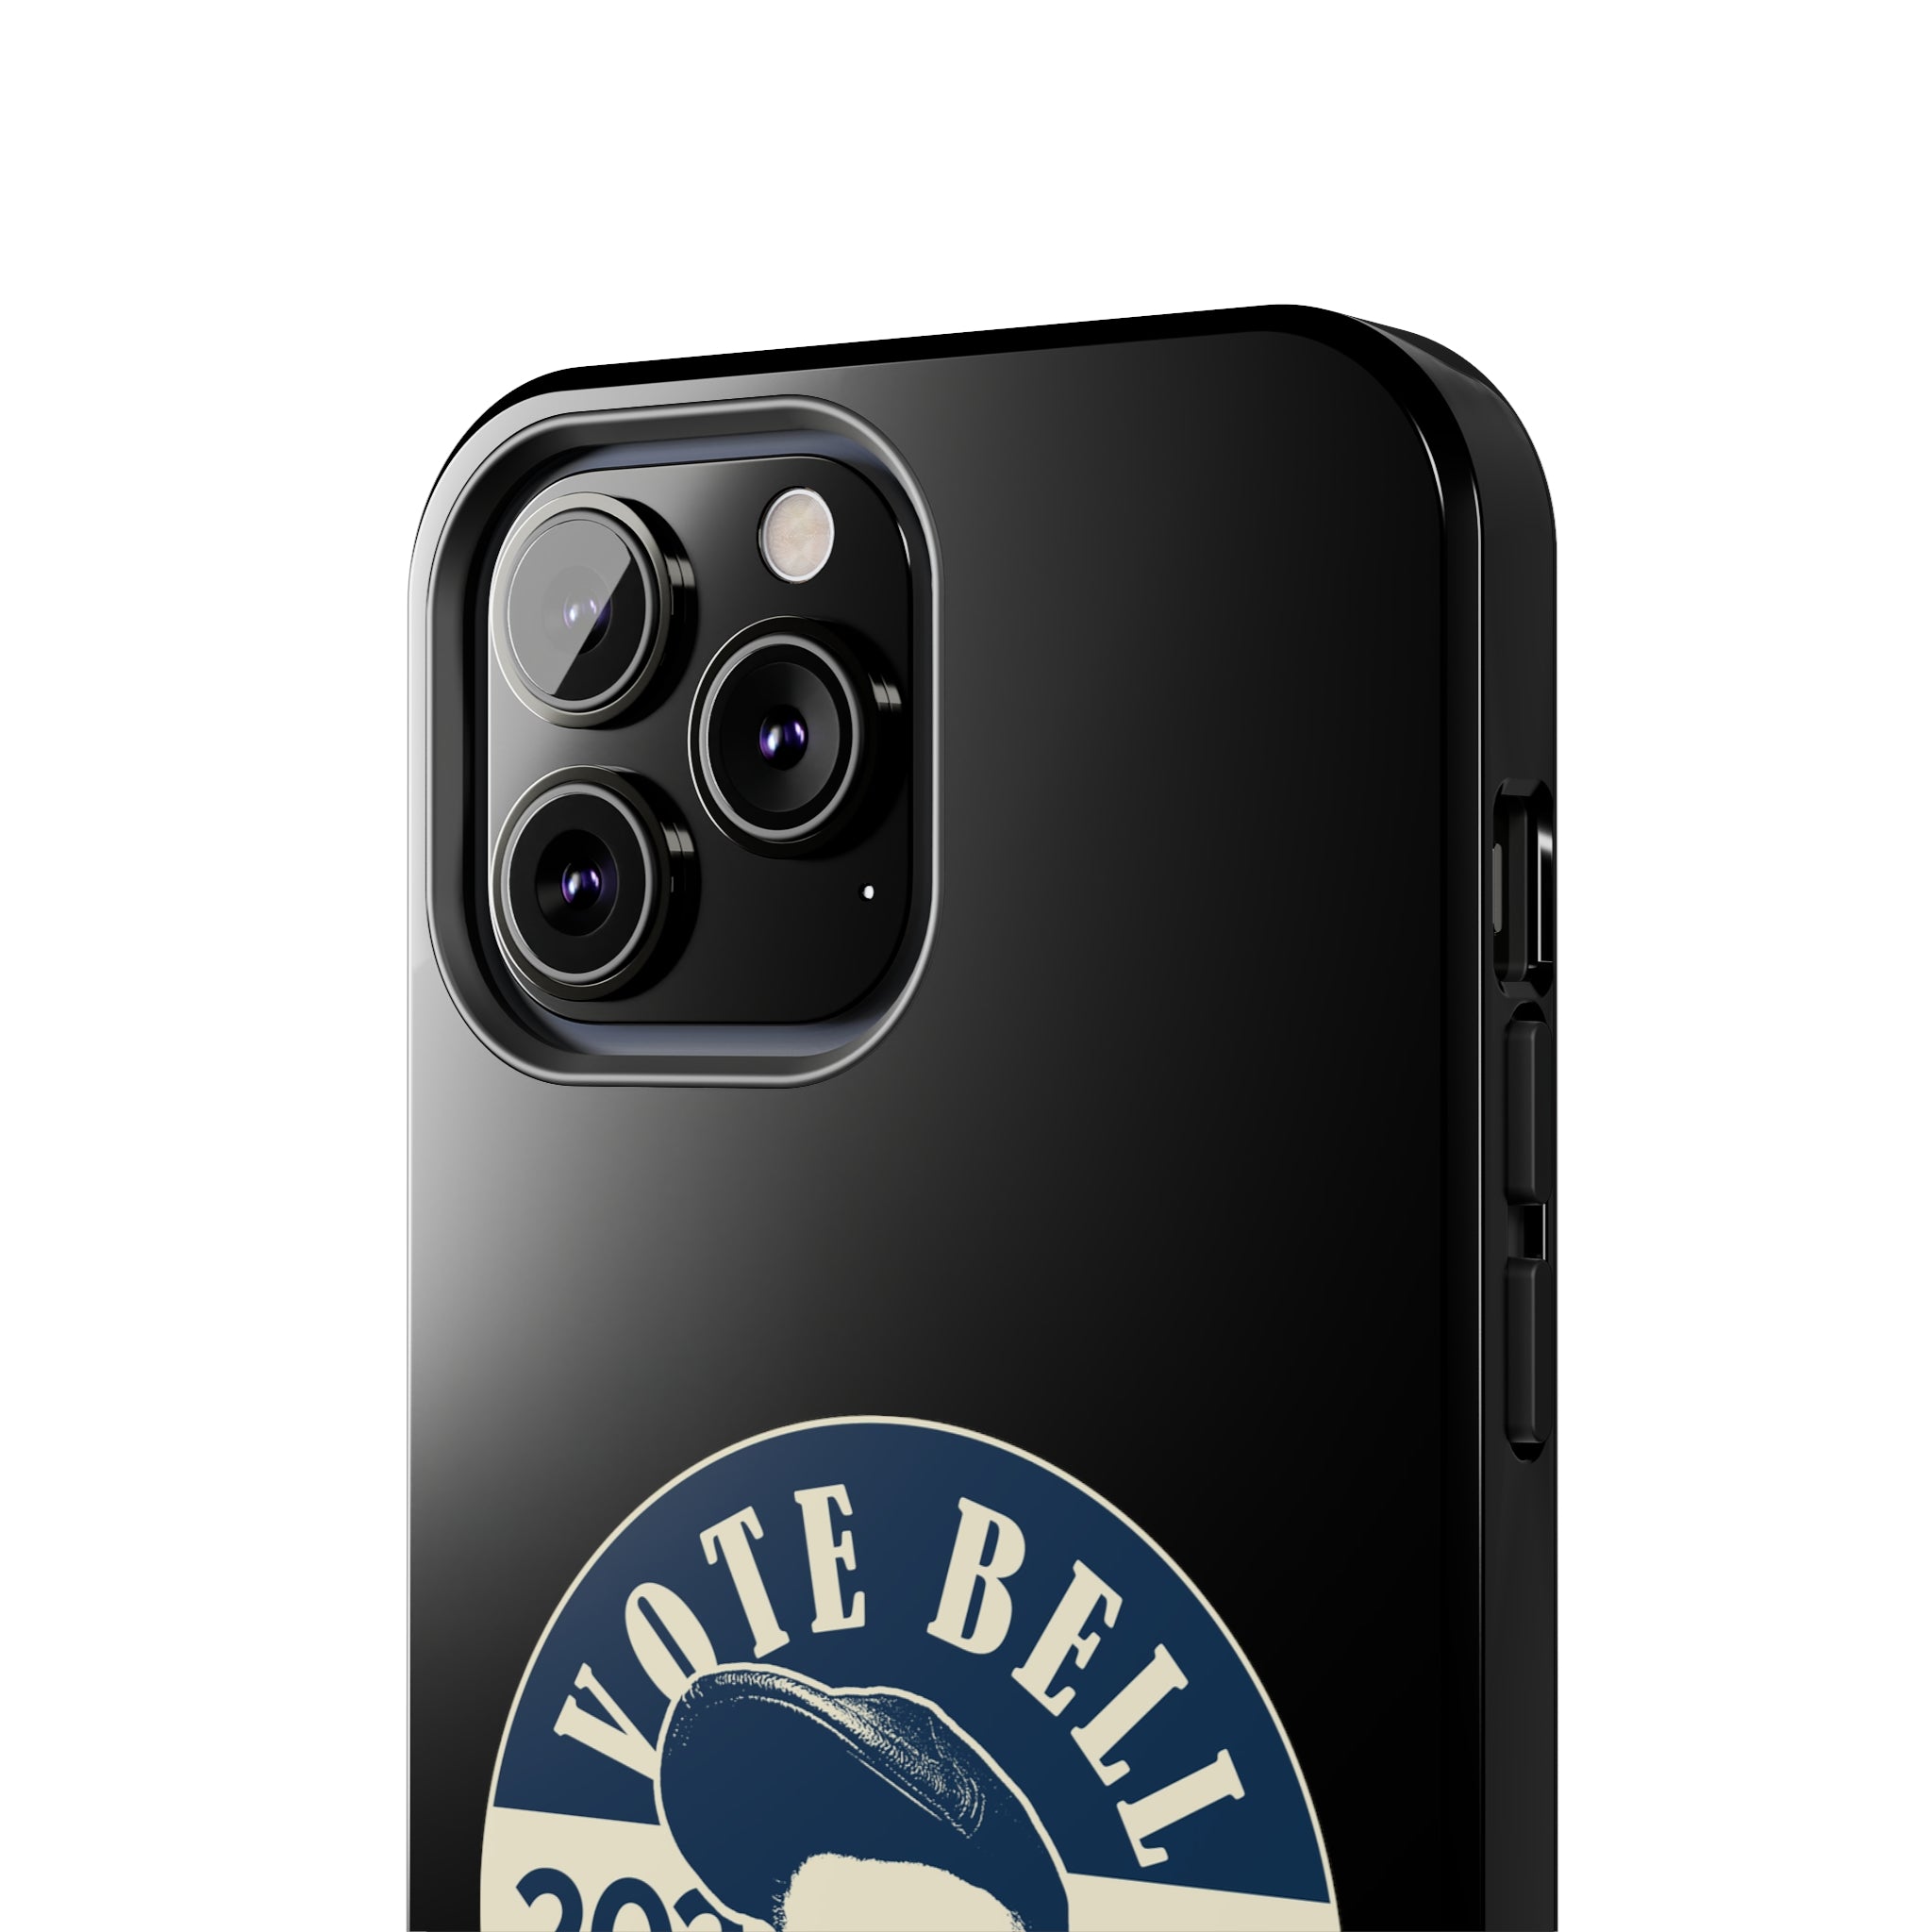 Vote For Bell Tough Phone Cases